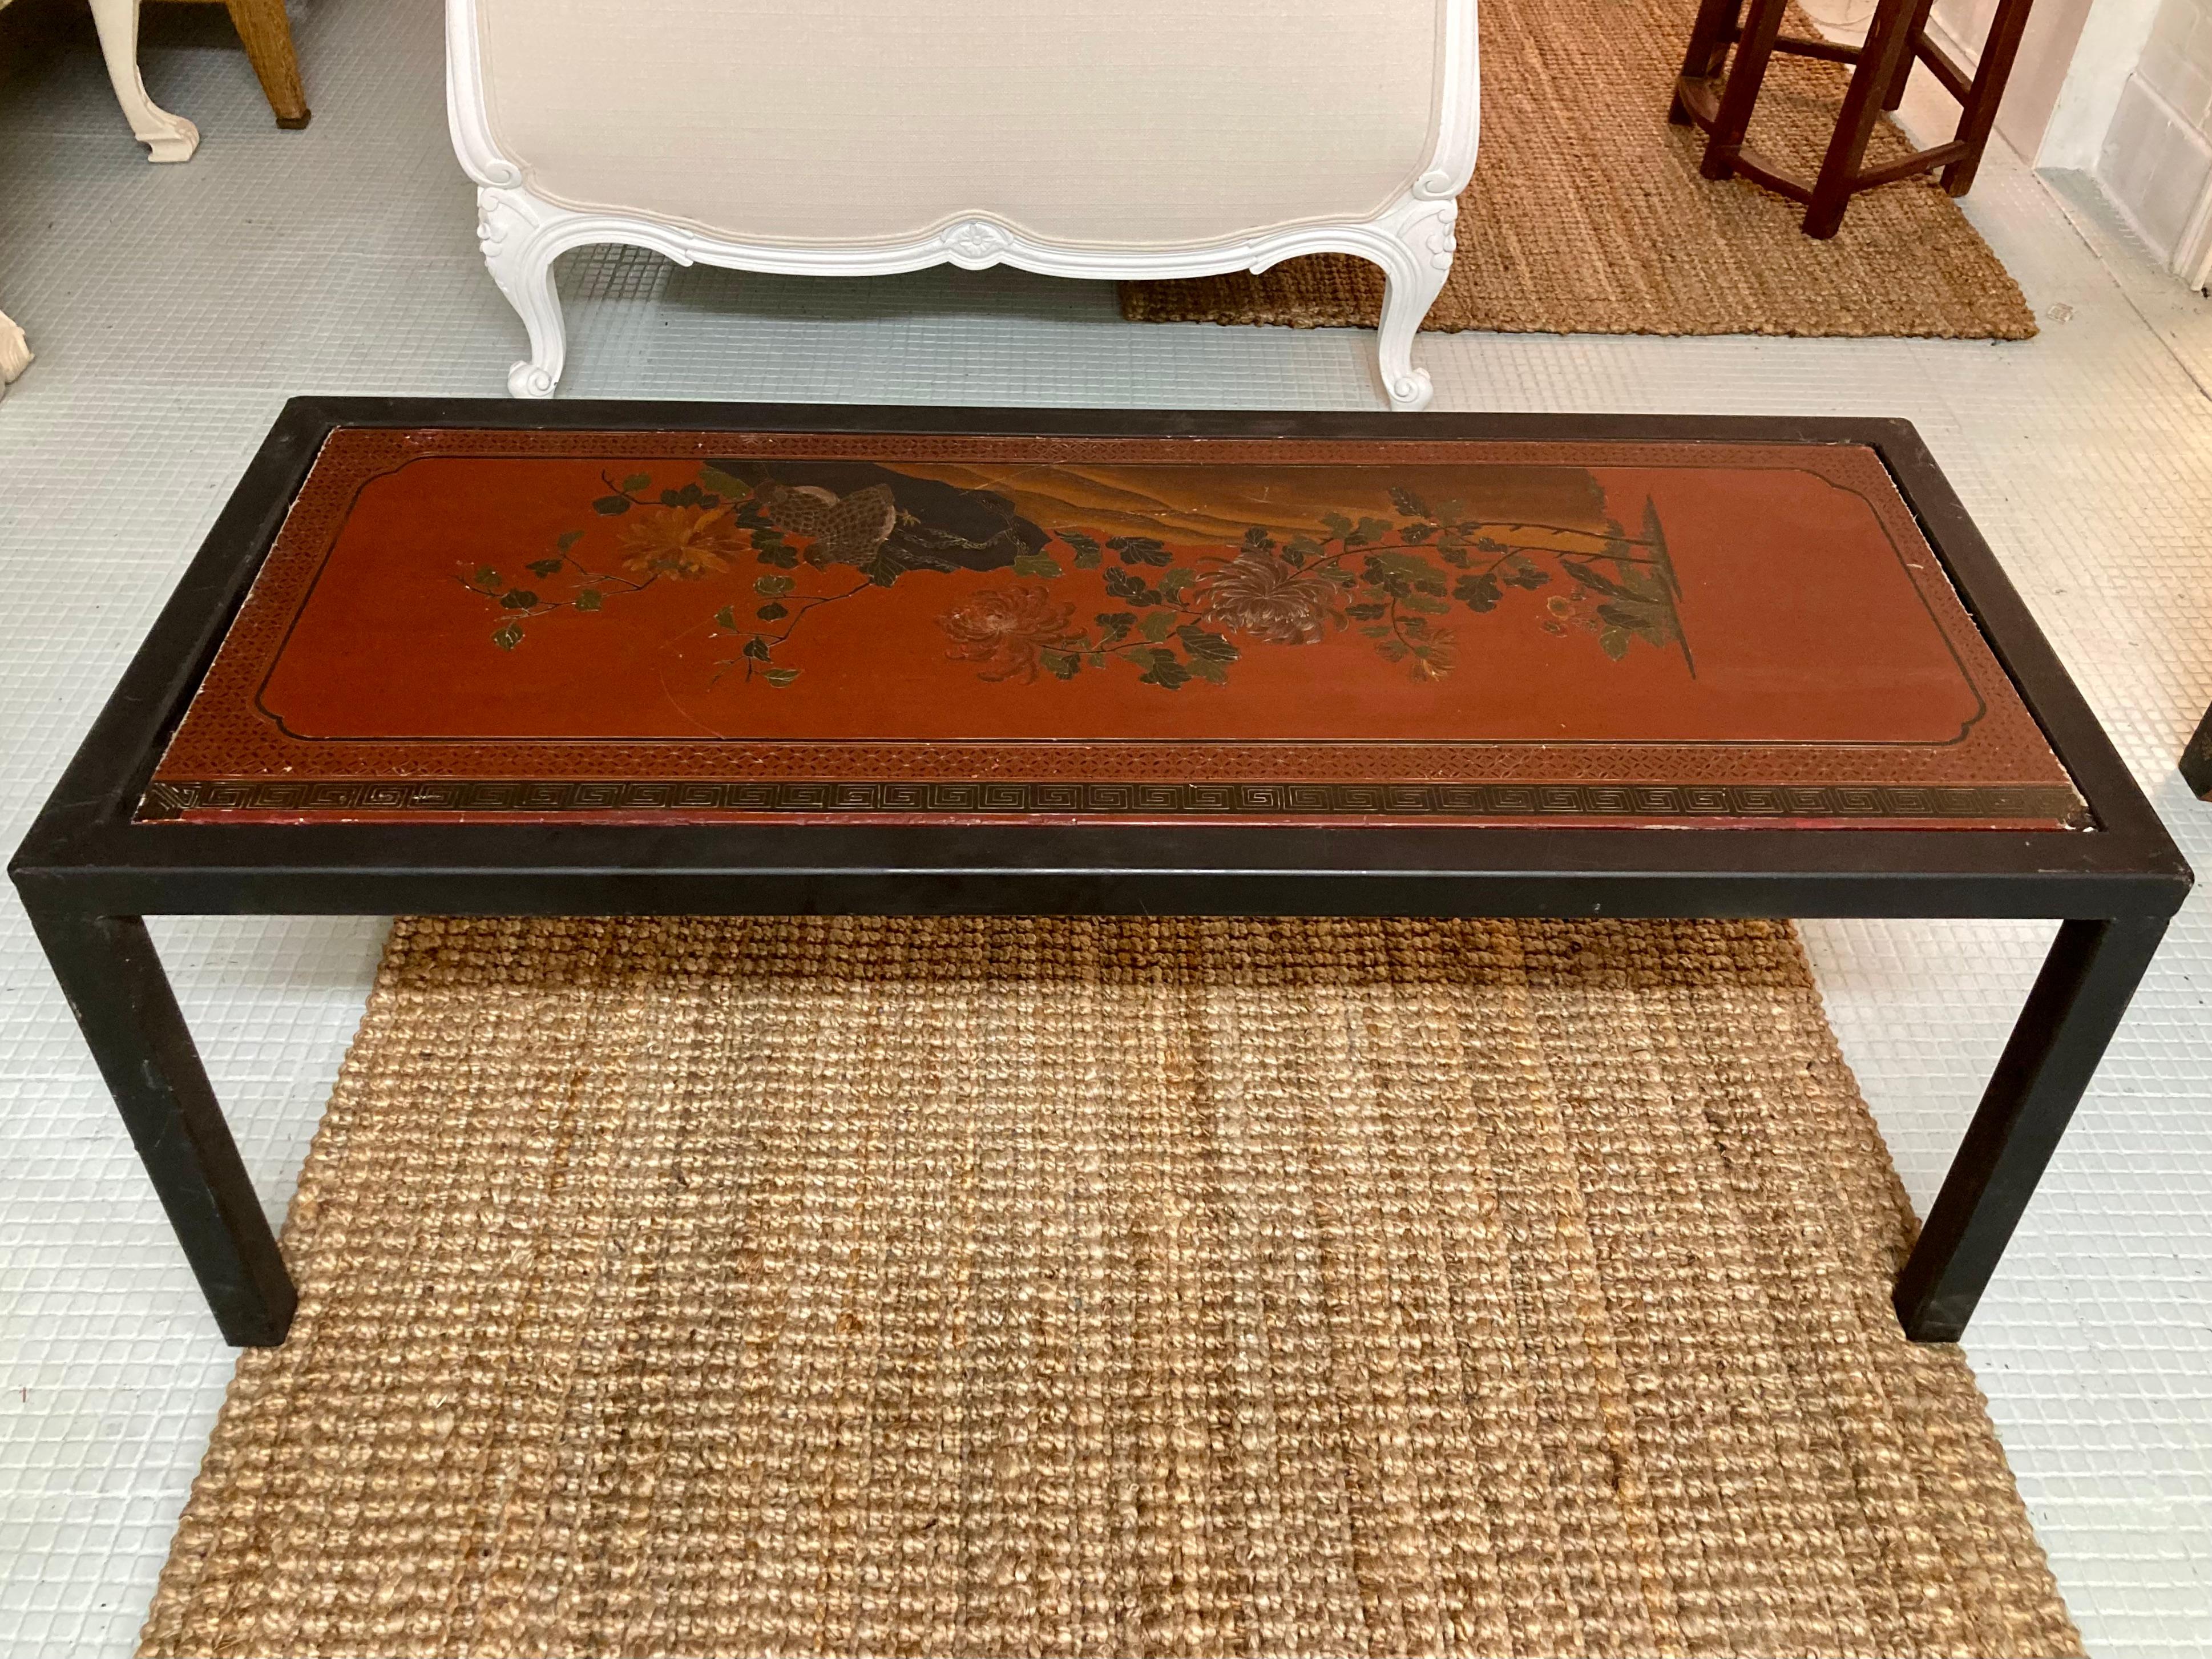 Beautiful Tony Duquette custom coffee table with inset Chinese panel. Nice drawing details on the panel. We have a second table very similar to this piece with slightly different dimensions, so collect both! From the Estate of Tony Duquette.